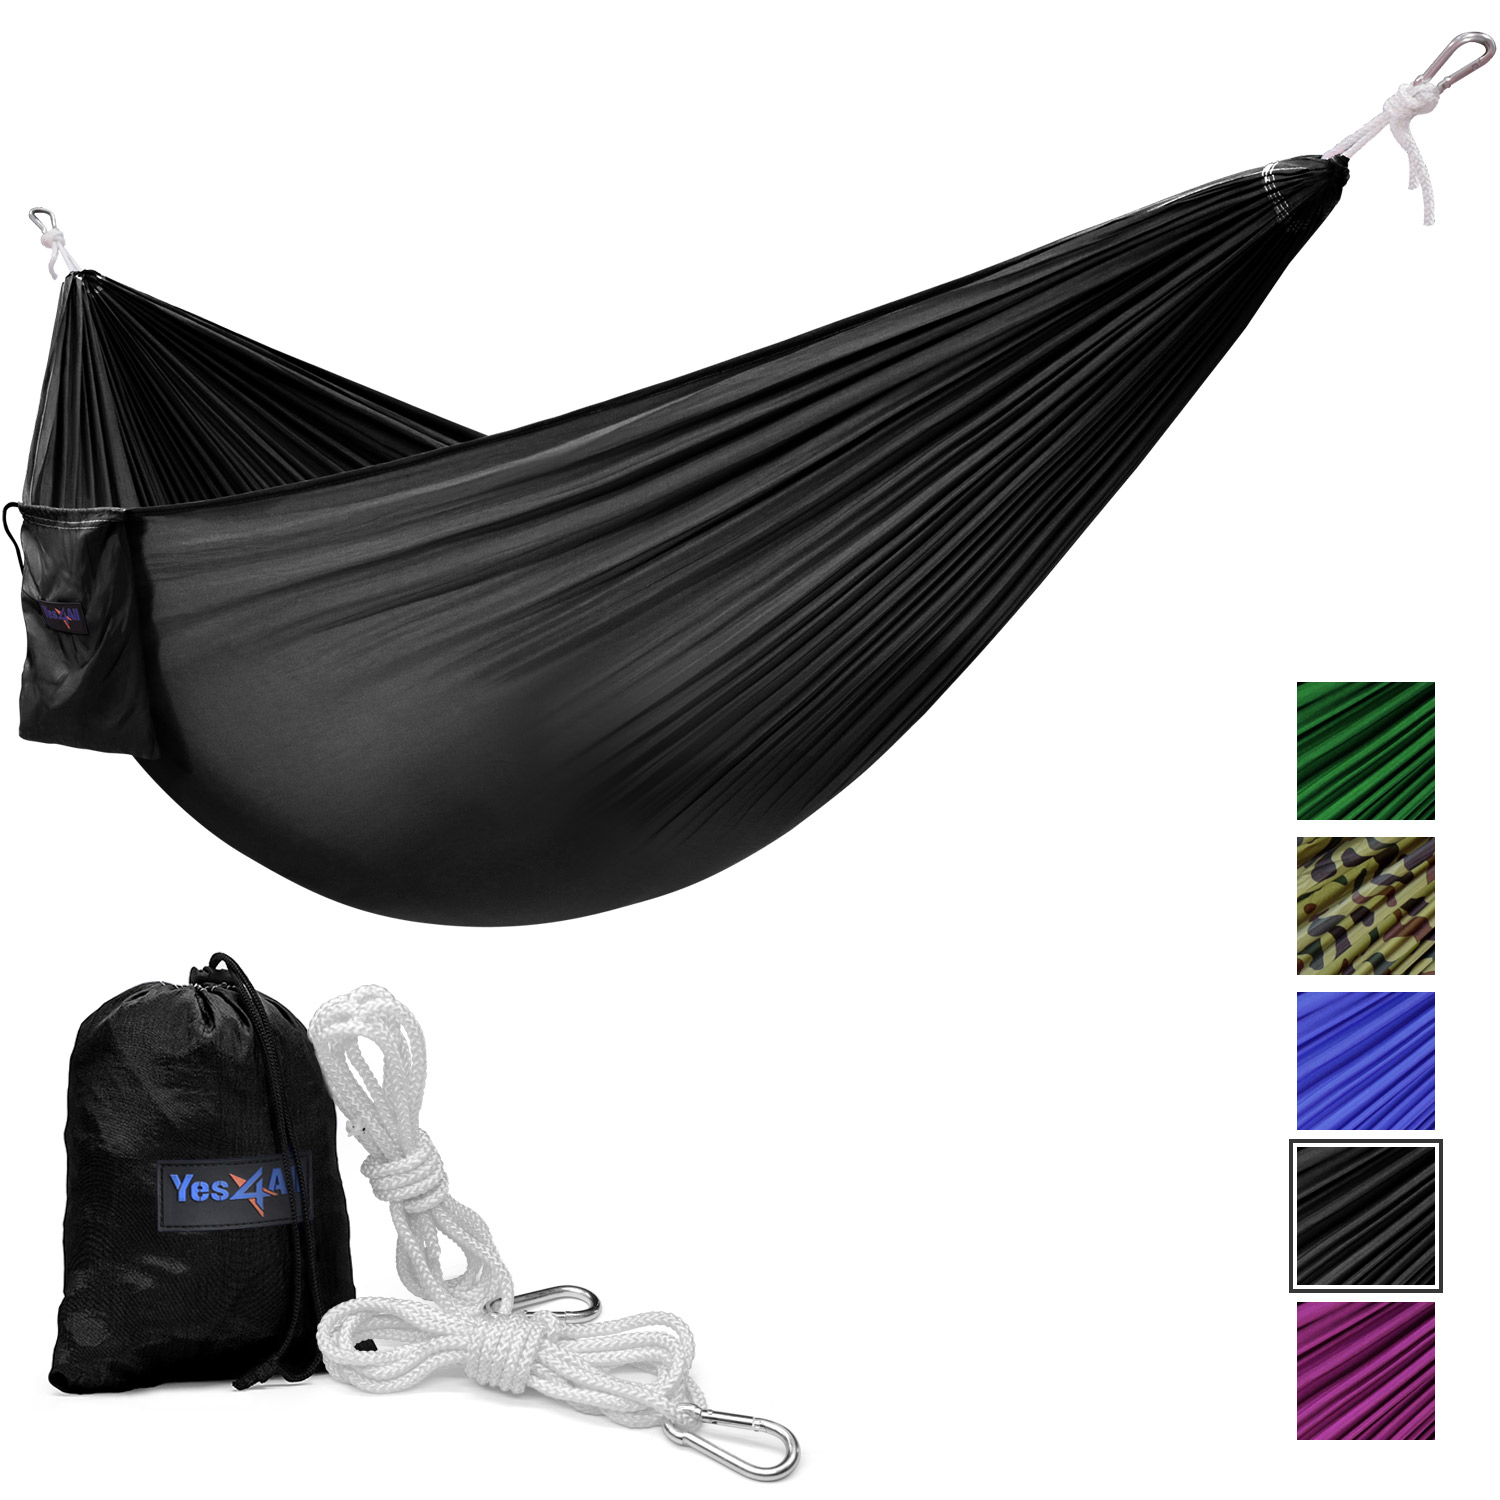 Yes4All Single Lightweight Camping Hammock with Carry Bag (Black) - image 1 of 5